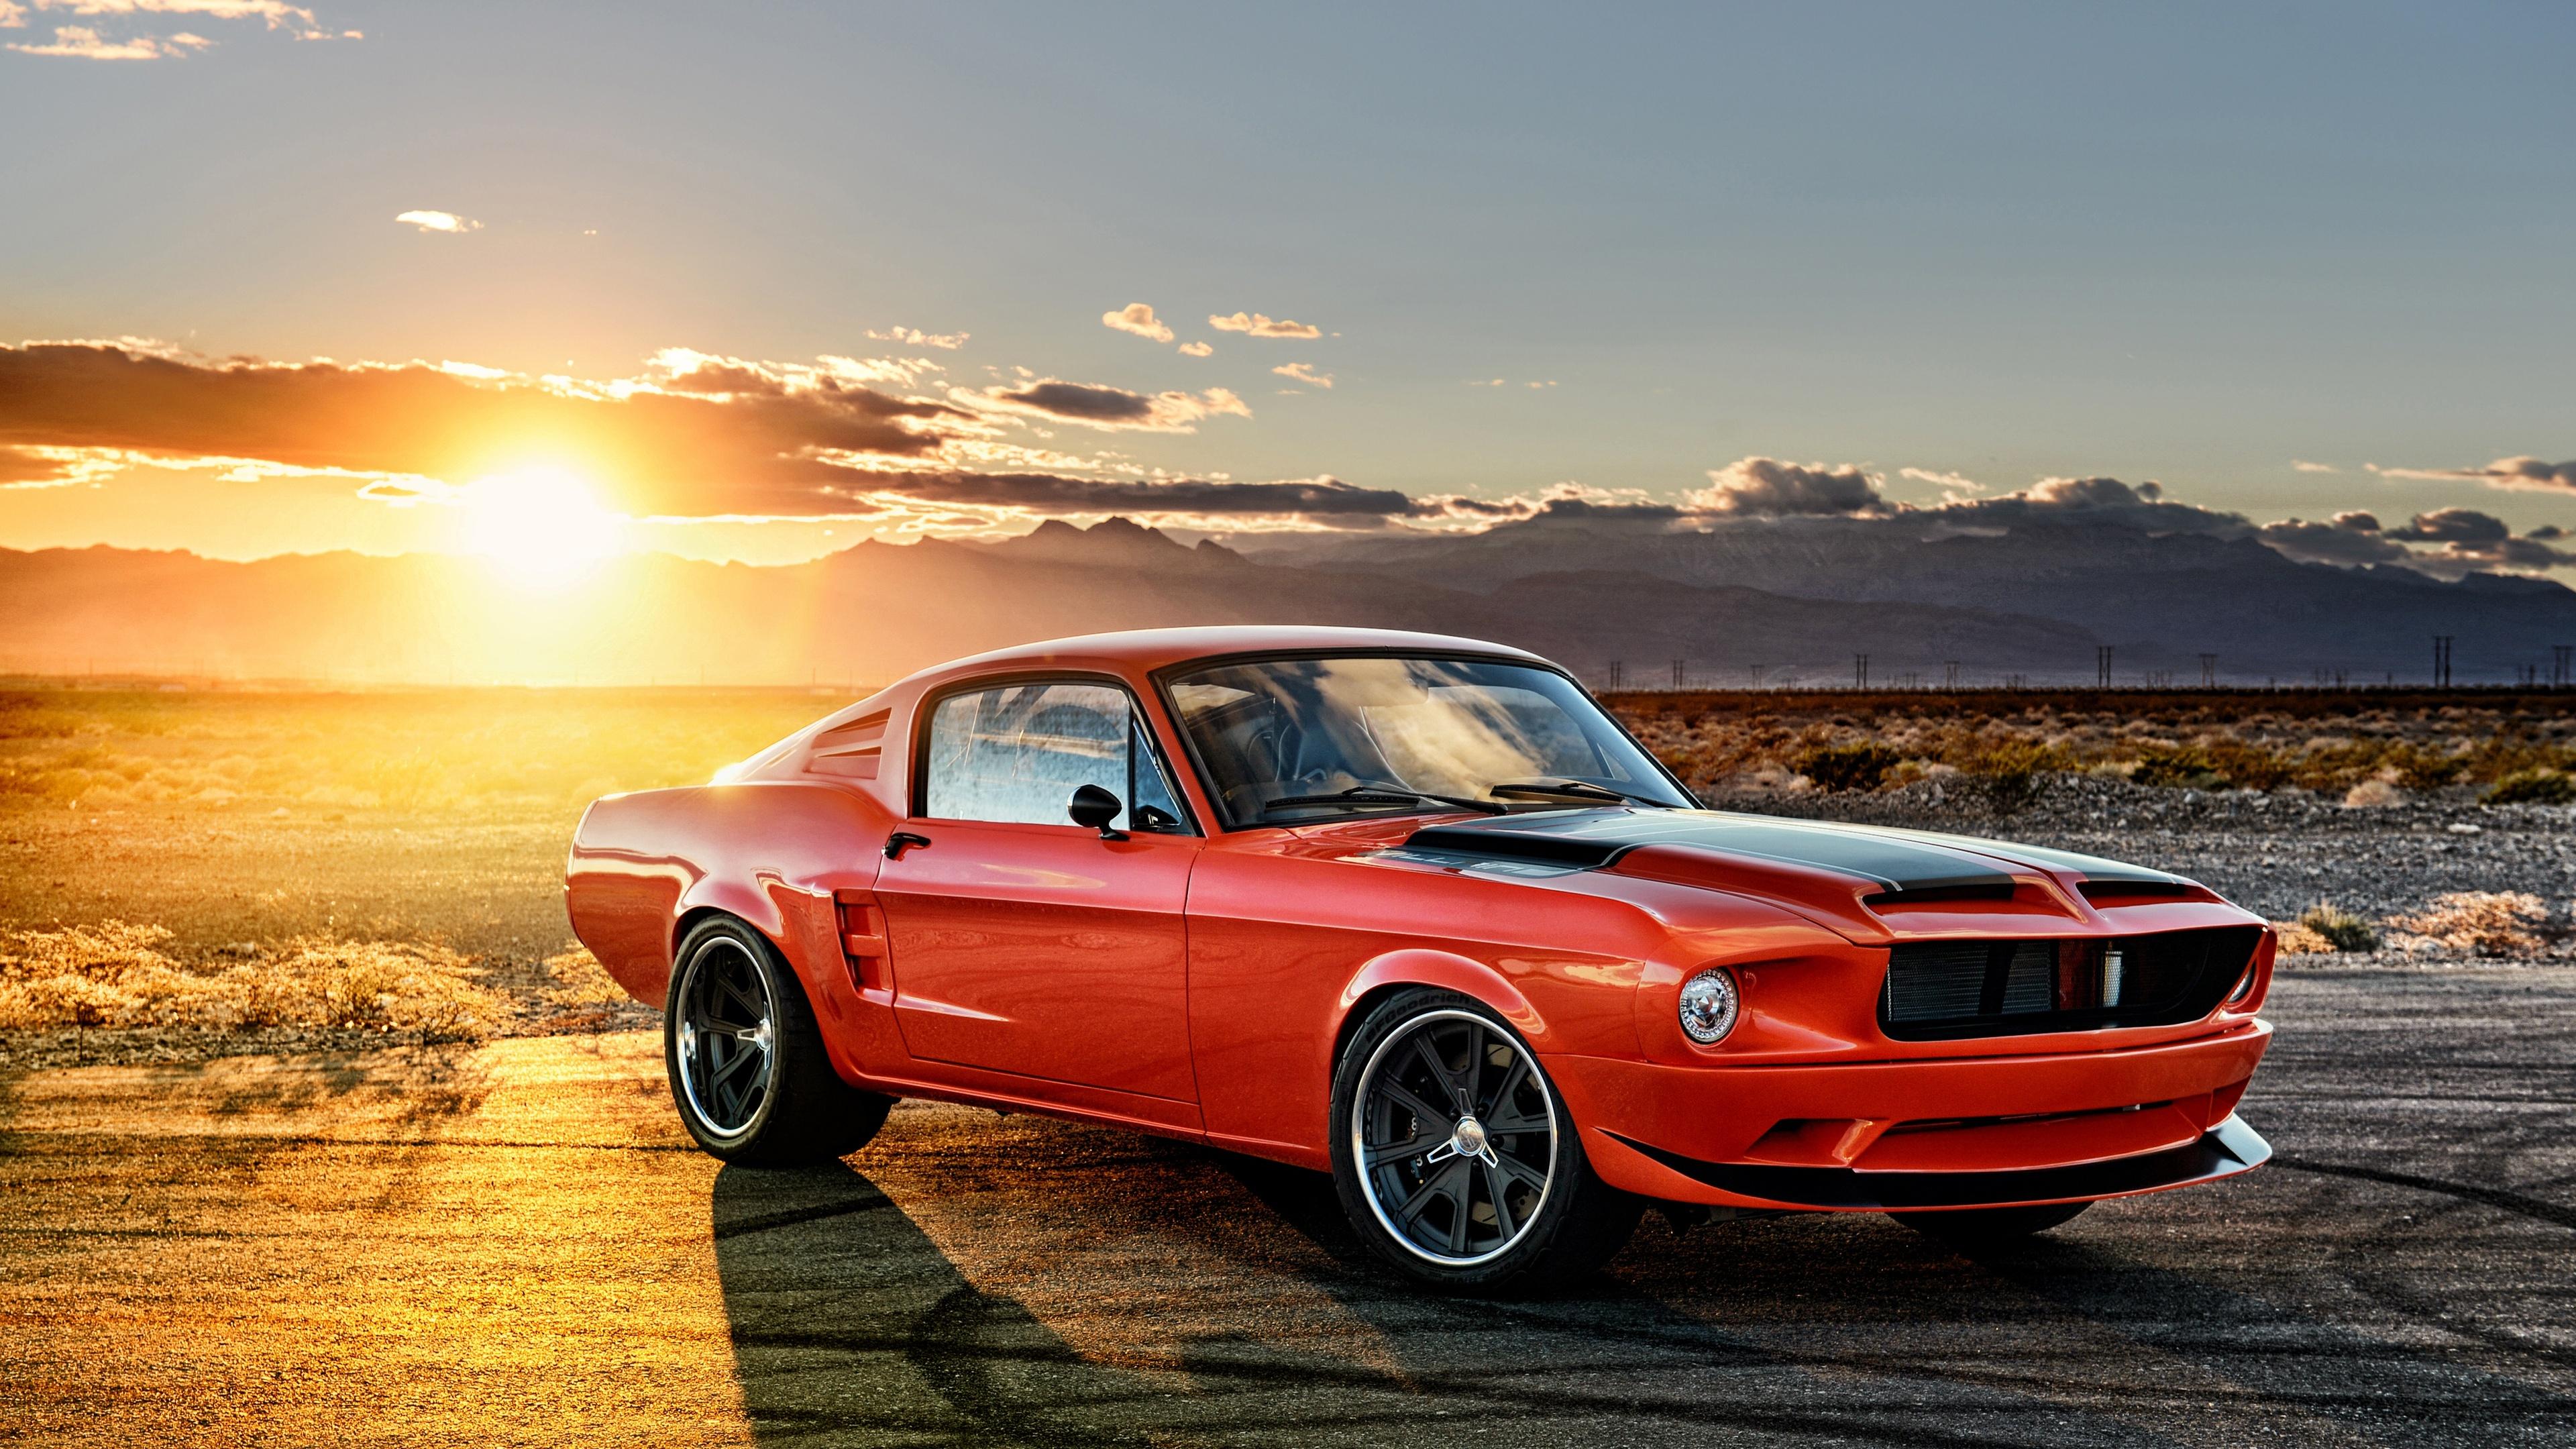 3840 x 2160 · jpeg - 3840x2160 Ford Mustang Muscle Car 4k 4k HD 4k Wallpapers, Images ...